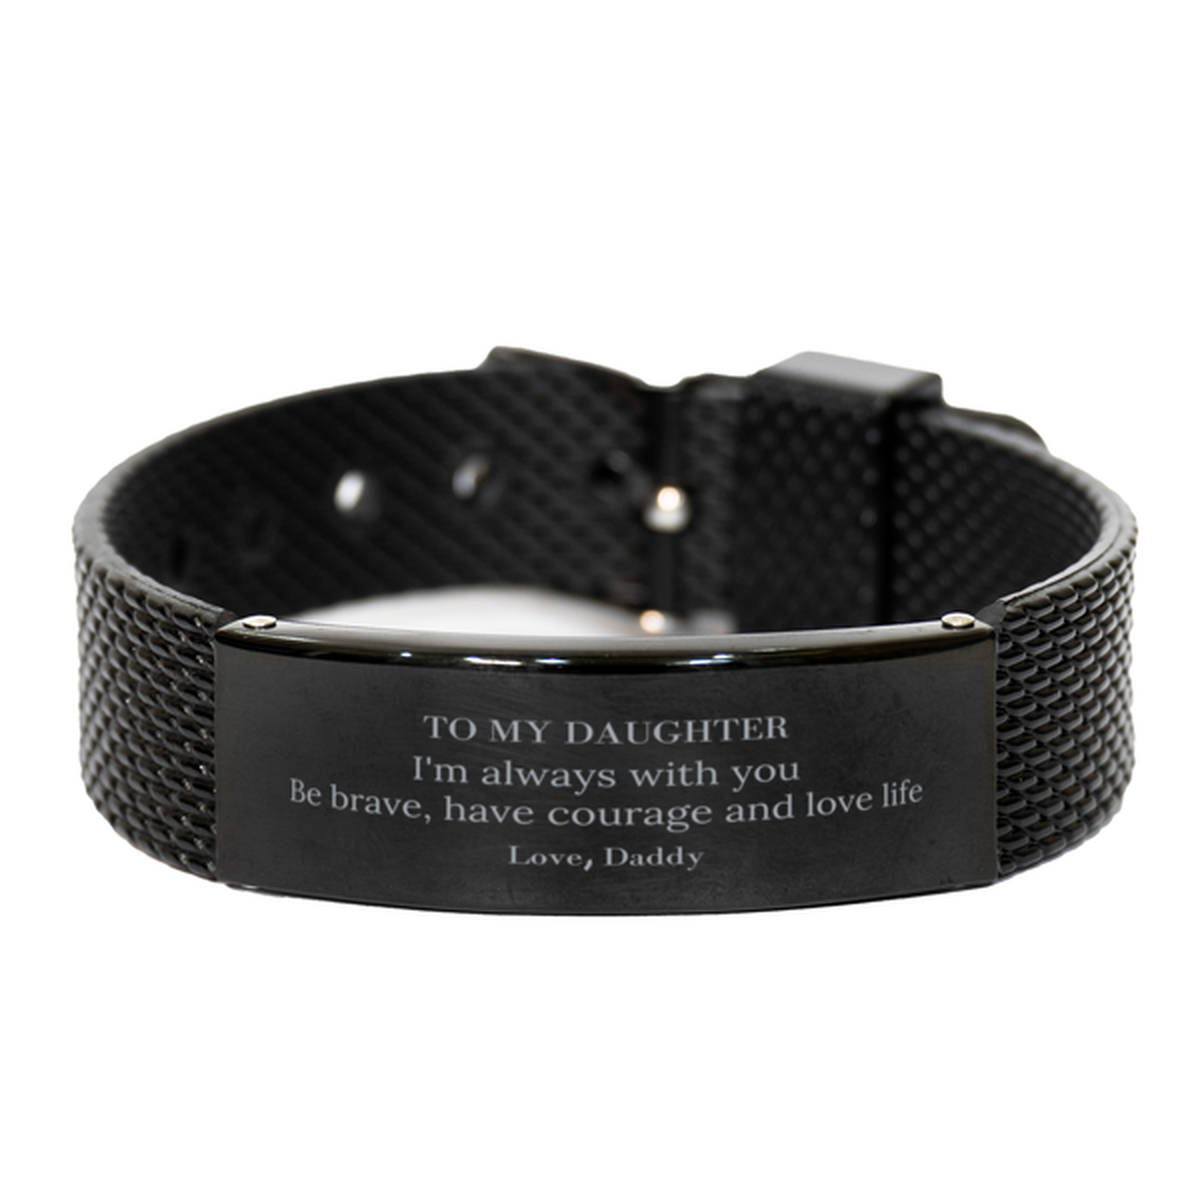 To My Daughter Gifts from Daddy, Unique Black Shark Mesh Bracelet Inspirational Christmas Birthday Graduation Gifts for Daughter I'm always with you. Be brave, have courage and love life. Love, Daddy